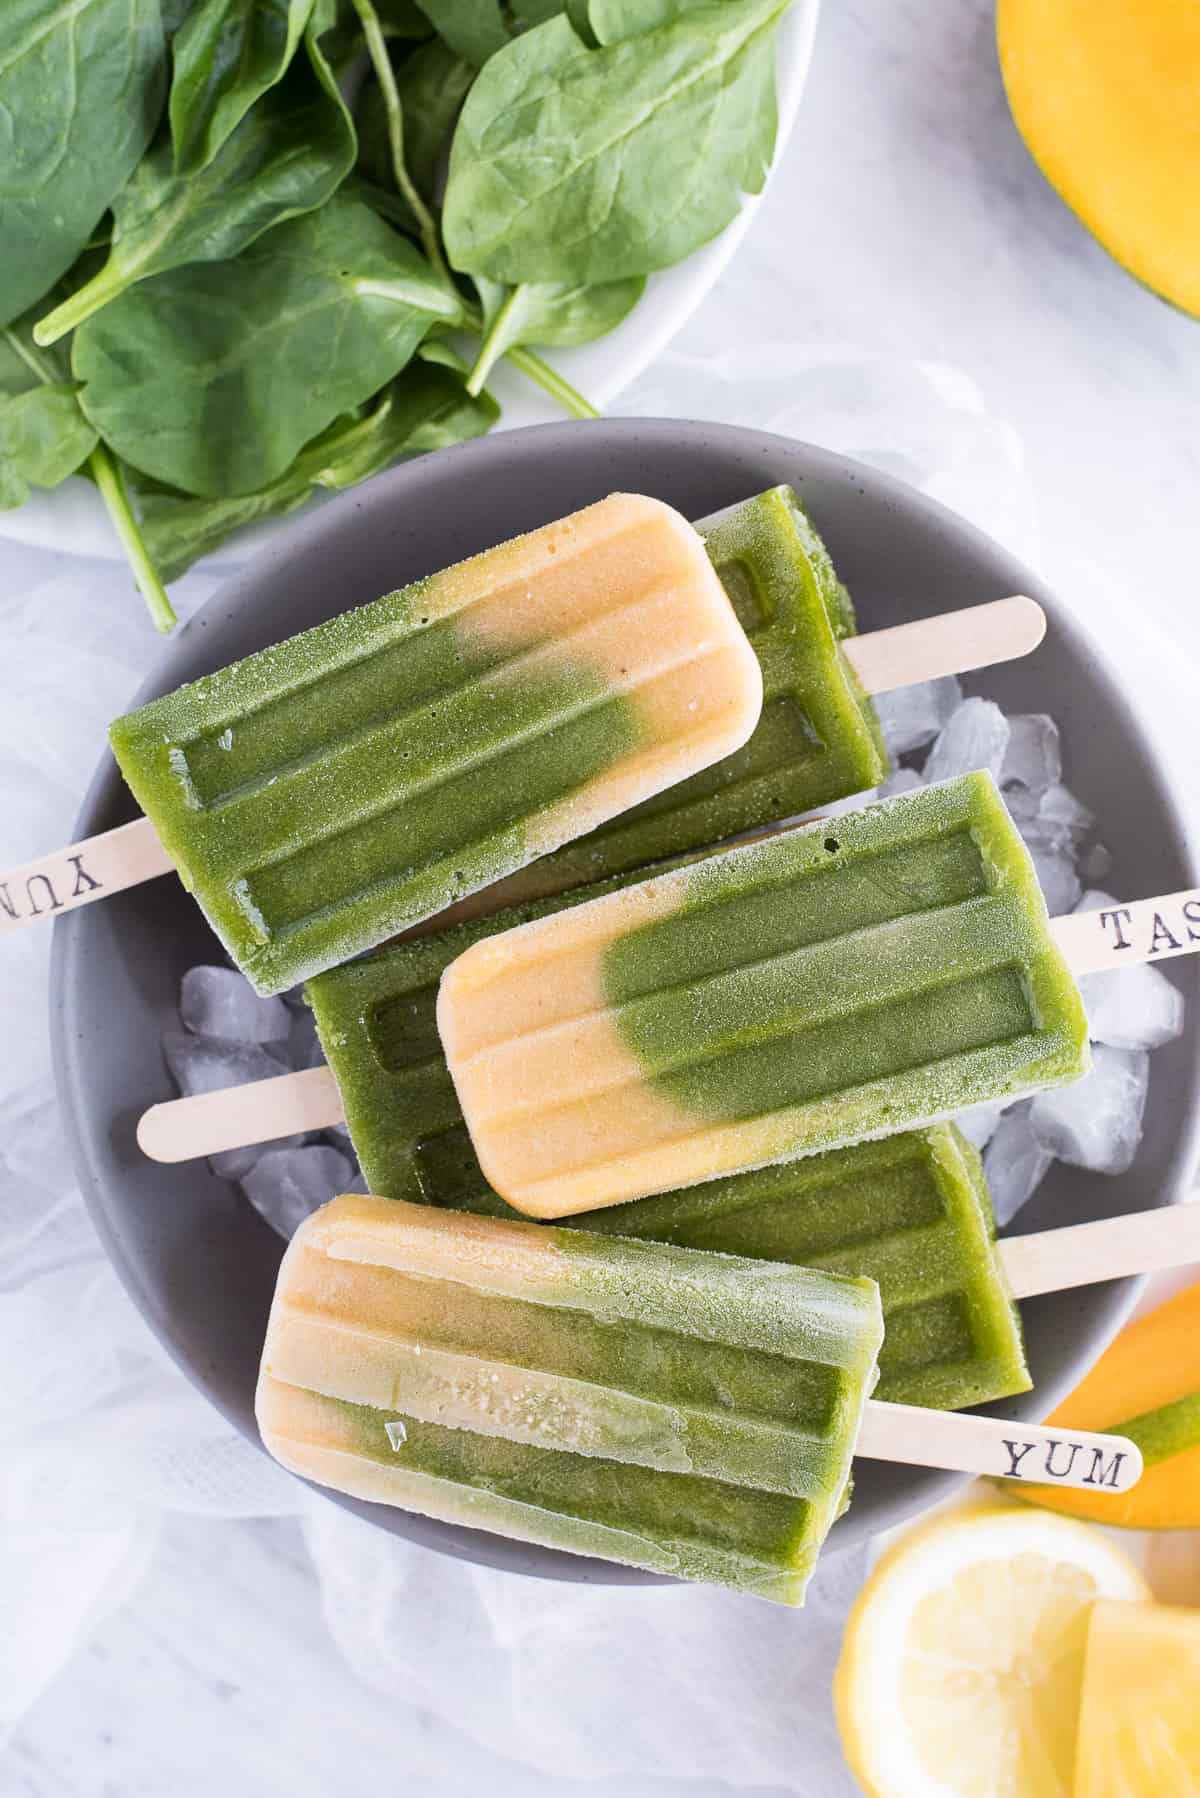 Green spinach and mango layered popsicles in a gray bowl on a white background